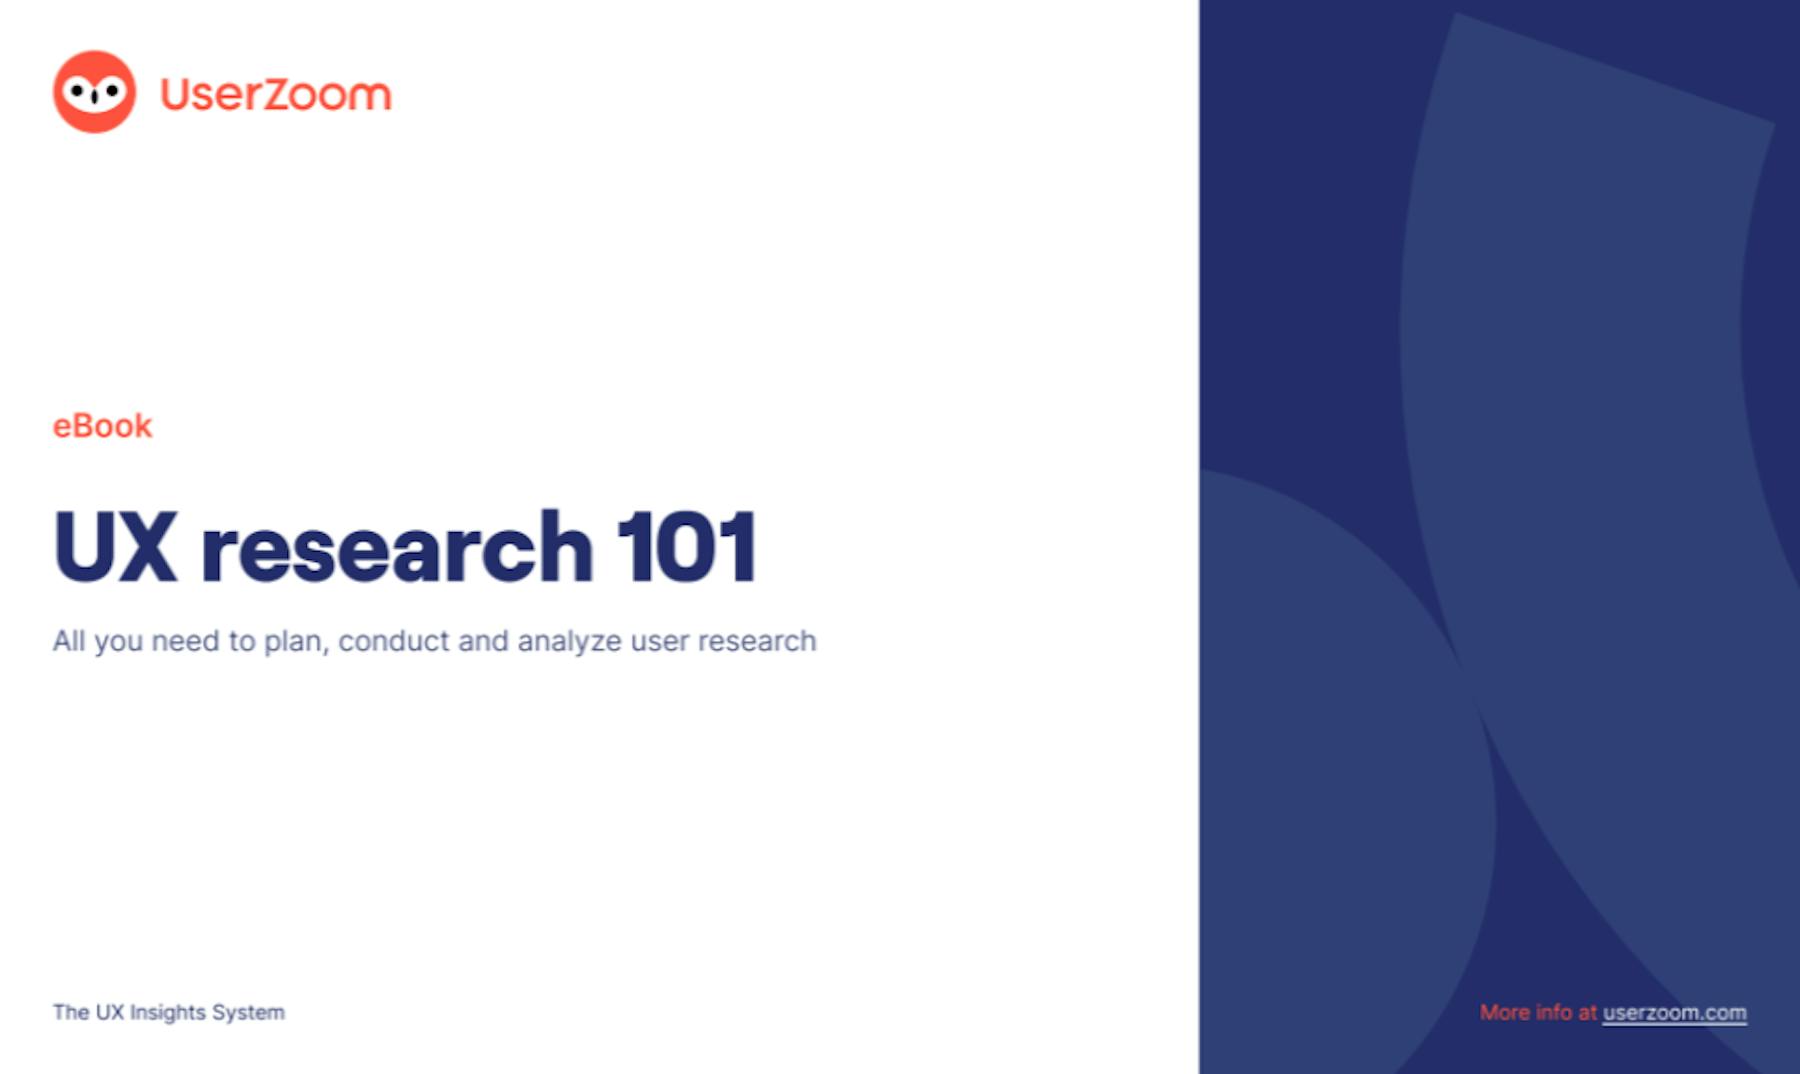 UX Research 101 - A comprehensive guide to planning, launching, managing, and analyzing UX research projects.